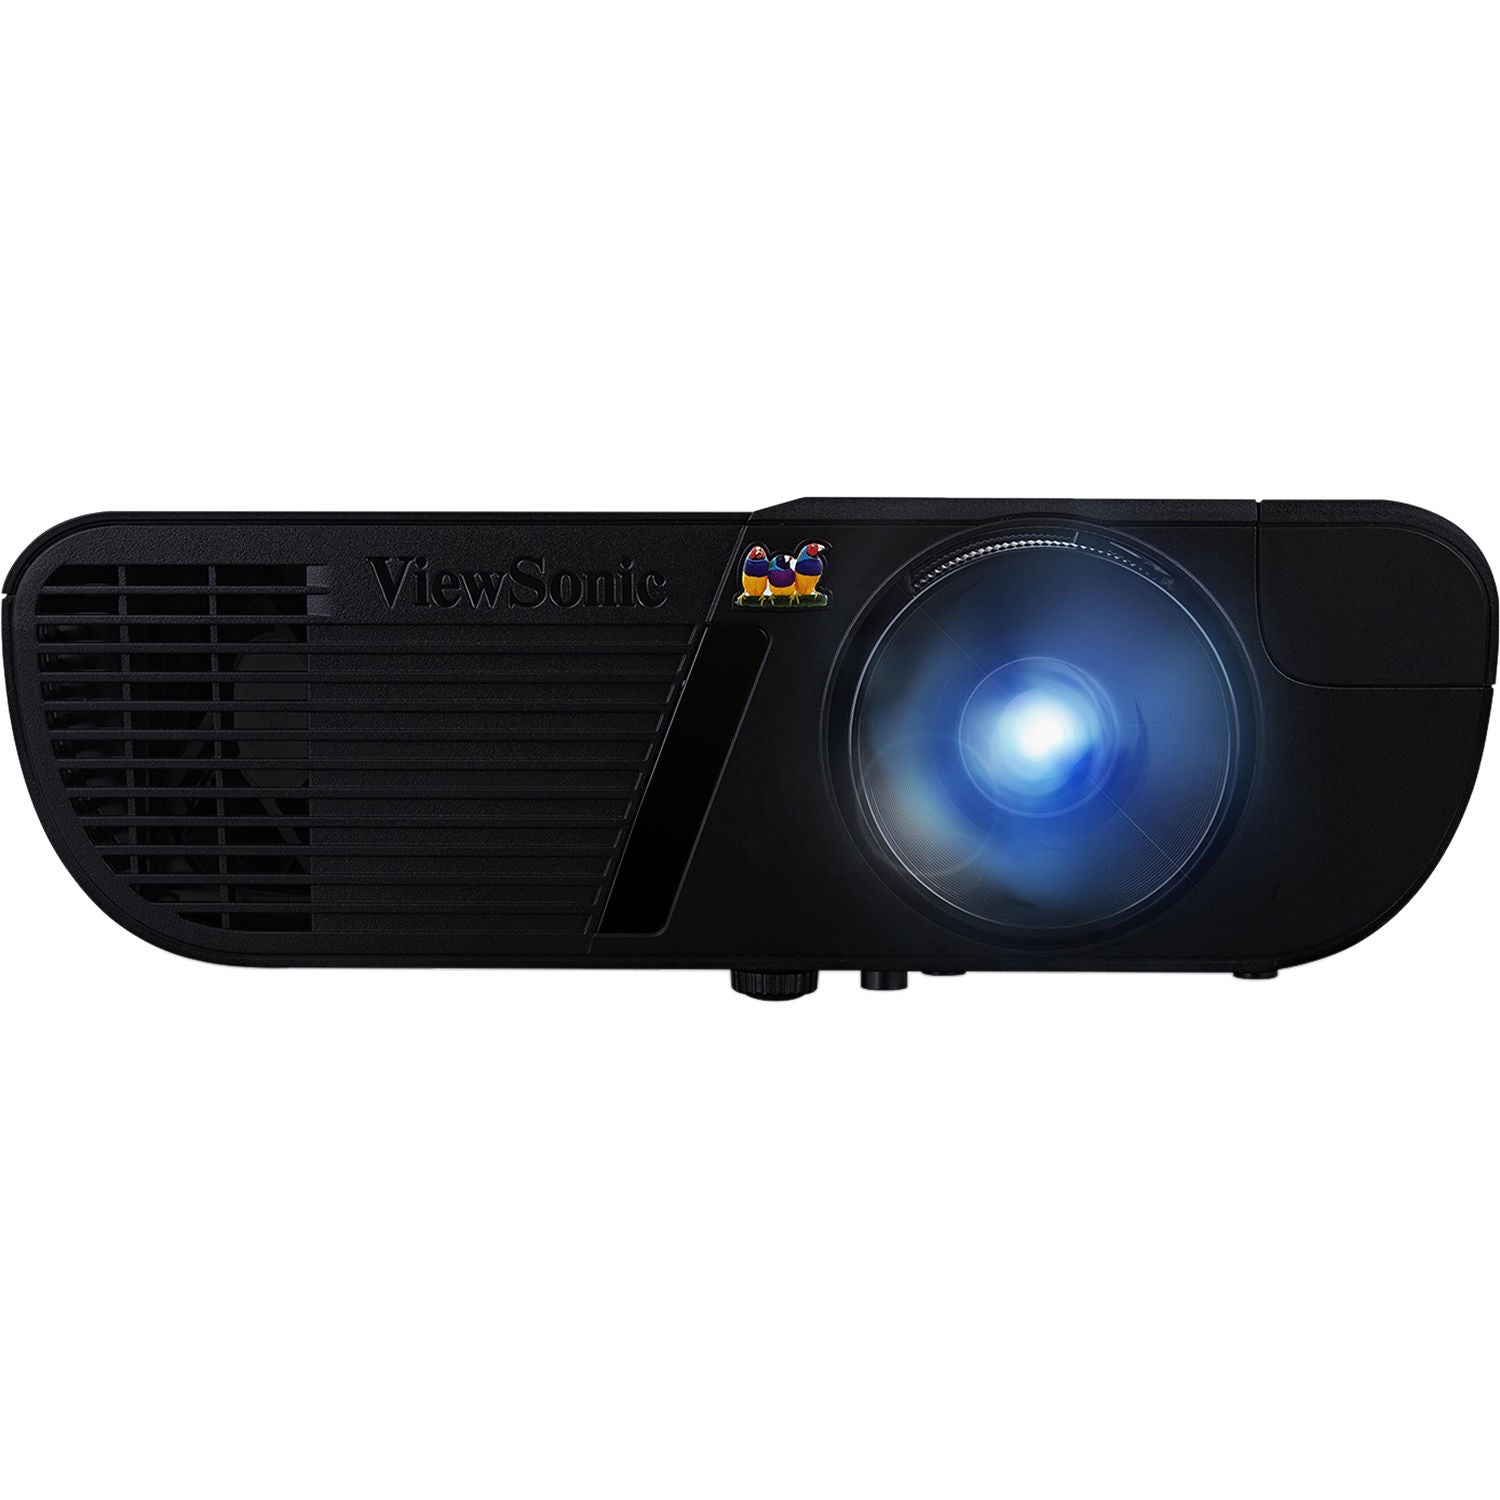 ViewSonic PJD6551W 3300 Lumens WXGA Networking Home and Office Projector